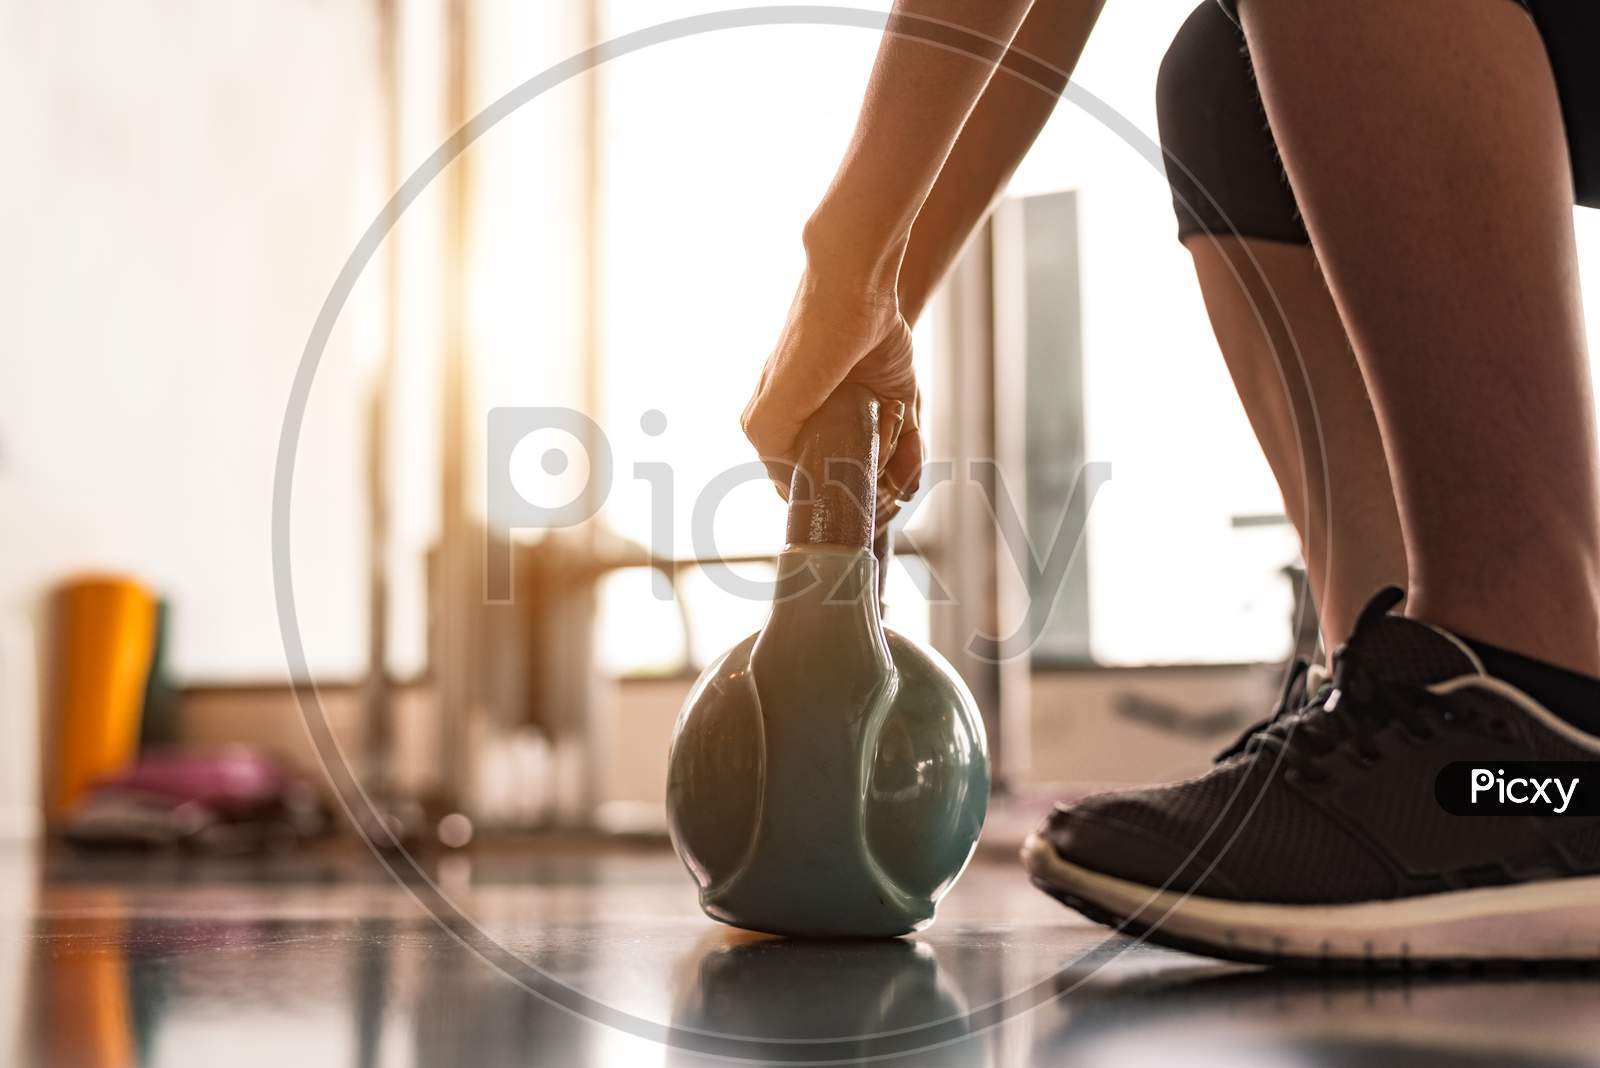 Close Up Of Woman Lifting Kettlebell Like Dumbbells In Fitness Sport Club Gym Training Center With Sport Equipment Near Window Background. Lifestyles And Workout Exercise For Bodybuilding And Healthy